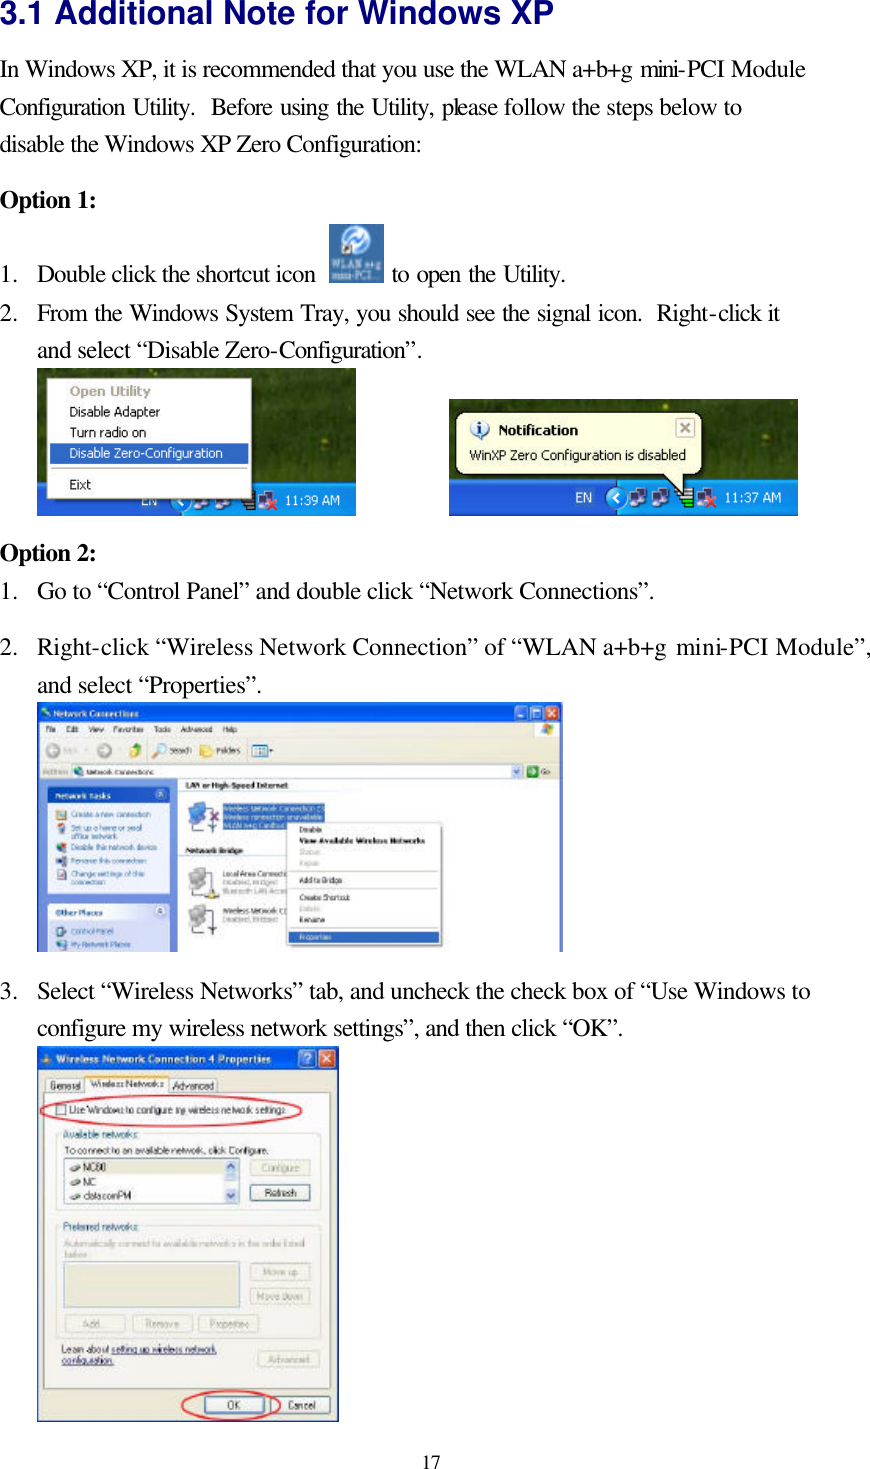  17 3.1 Additional Note for Windows XP   In Windows XP, it is recommended that you use the WLAN a+b+g mini-PCI Module Configuration Utility.  Before using the Utility, please follow the steps below to disable the Windows XP Zero Configuration:  Option 1: 1.  Double click the shortcut icon   to open the Utility. 2.  From the Windows System Tray, you should see the signal icon.  Right-click it and select “Disable Zero-Configuration”.      Option 2: 1.  Go to “Control Panel” and double click “Network Connections”.  2.  Right-click “Wireless Network Connection” of “WLAN a+b+g mini-PCI Module”, and select “Properties”.   3.  Select “Wireless Networks” tab, and uncheck the check box of “Use Windows to configure my wireless network settings”, and then click “OK”.  